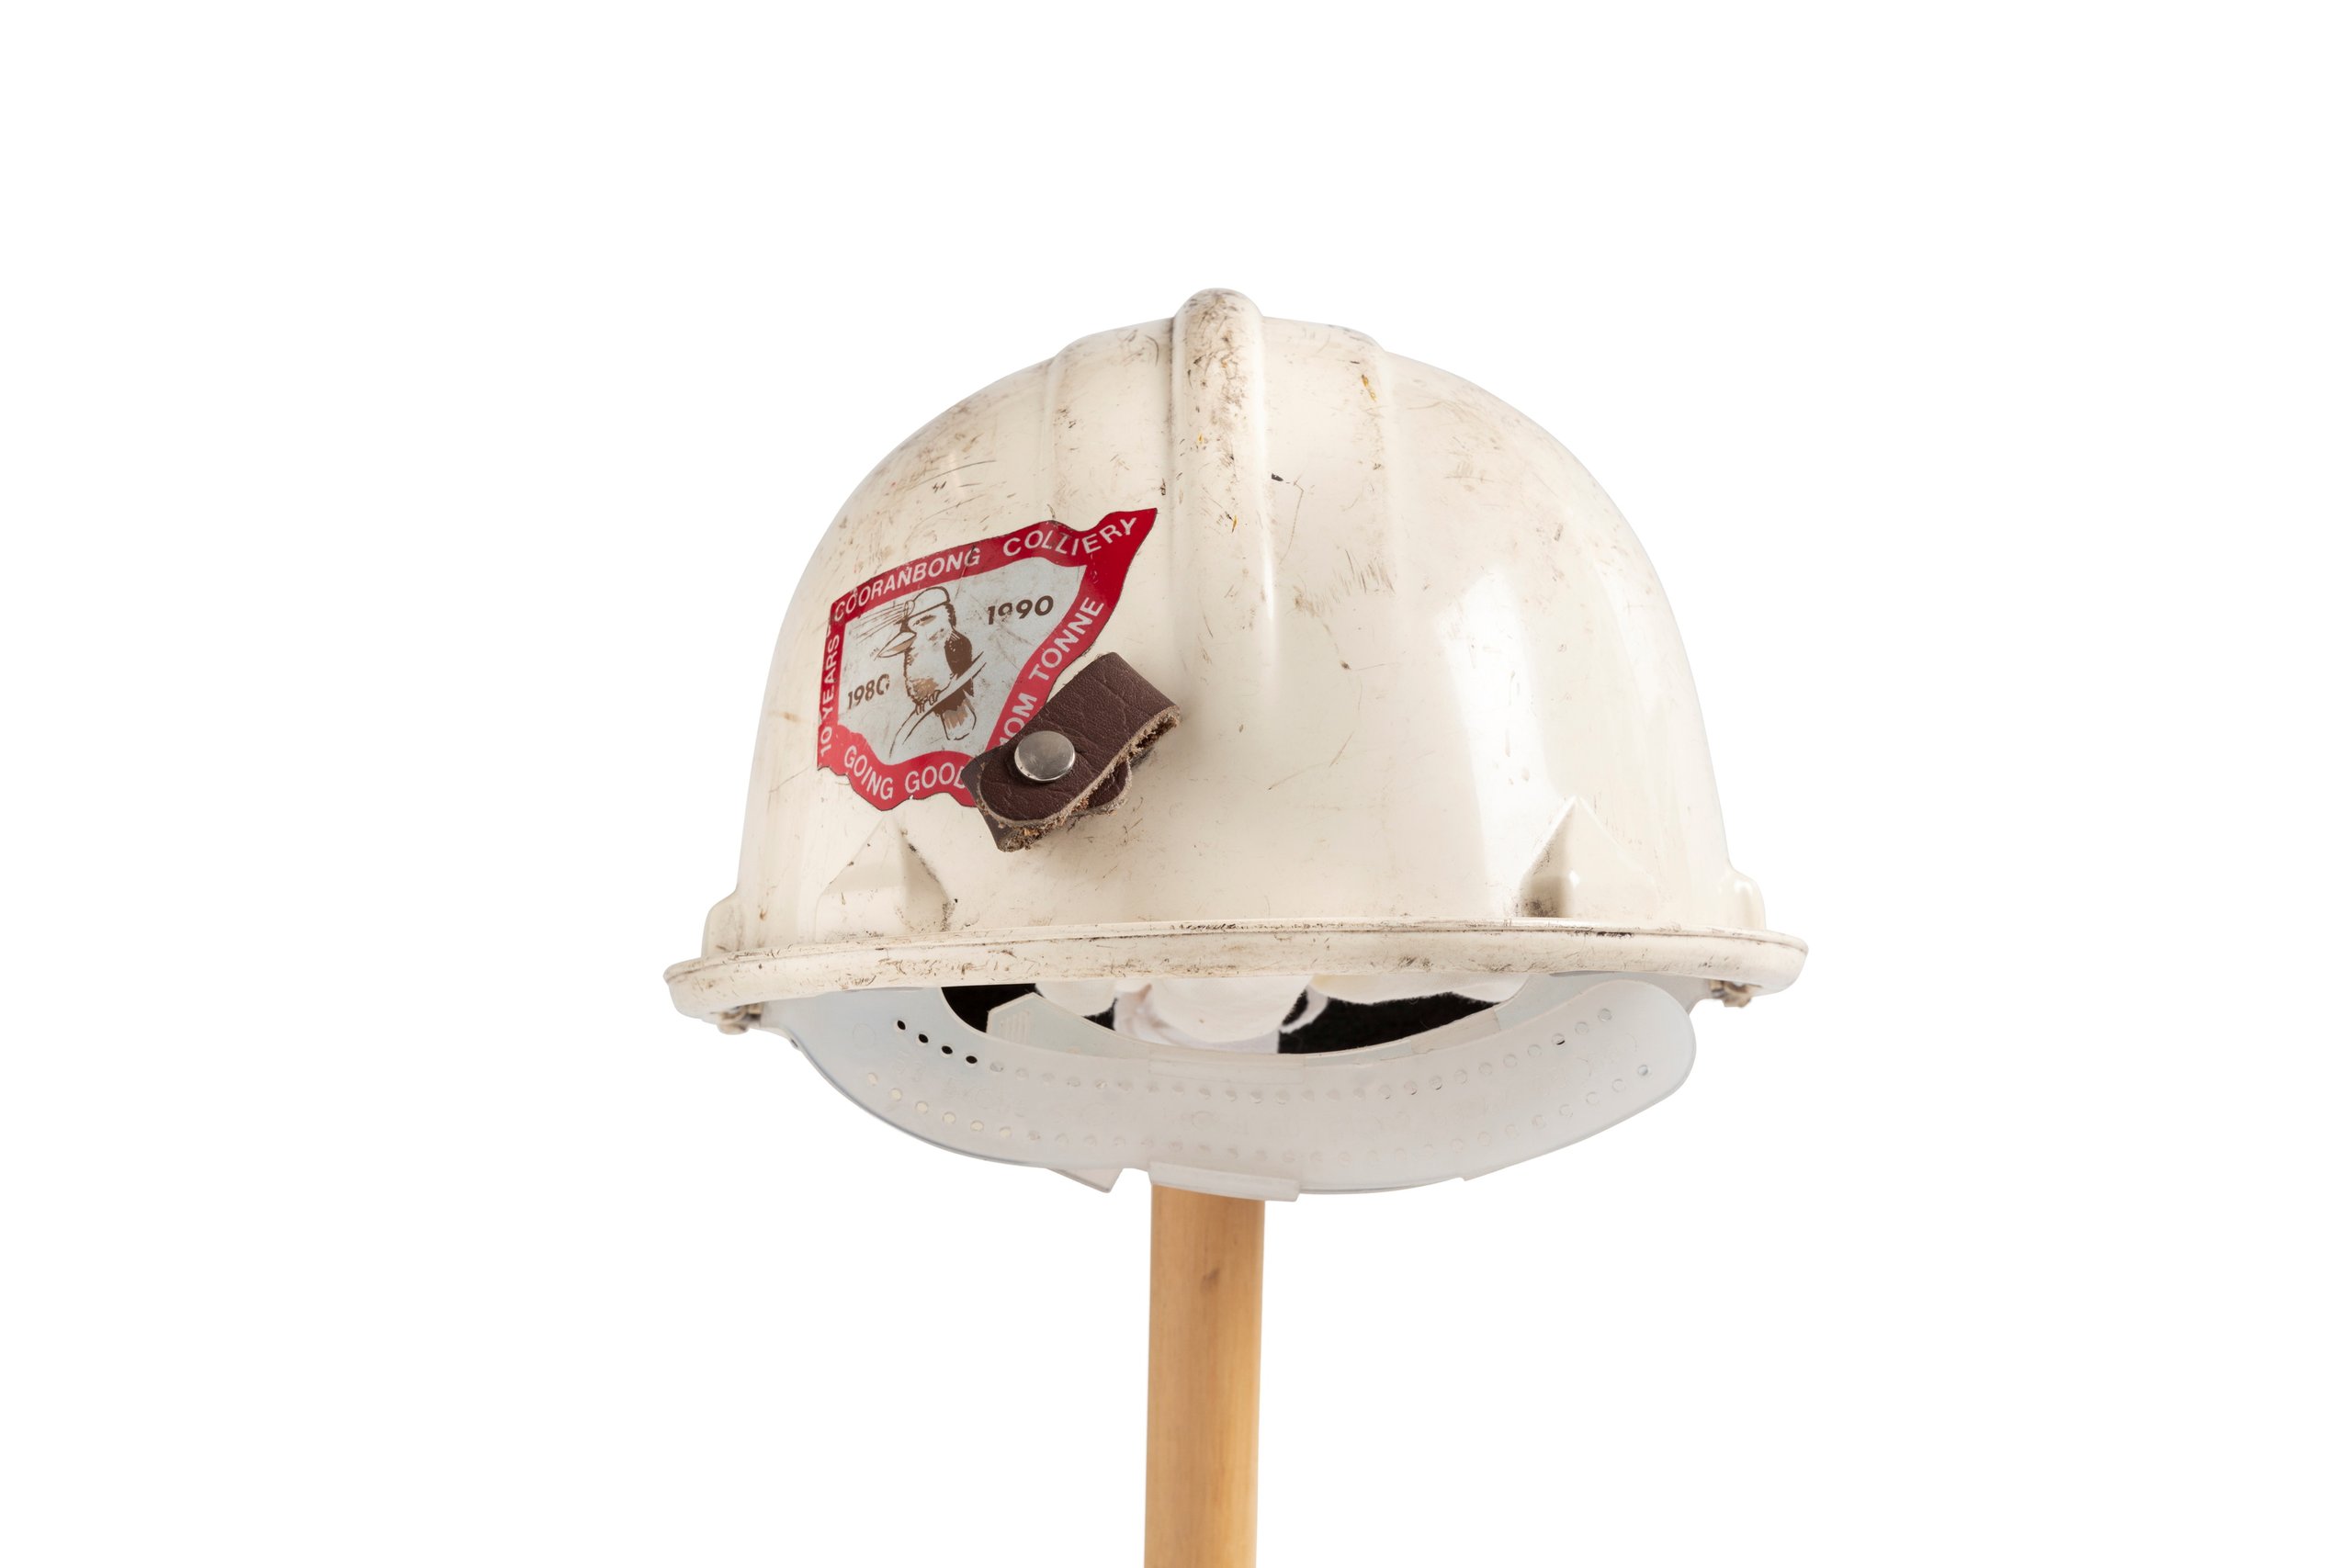 Miners safety helmet by Protector Safety